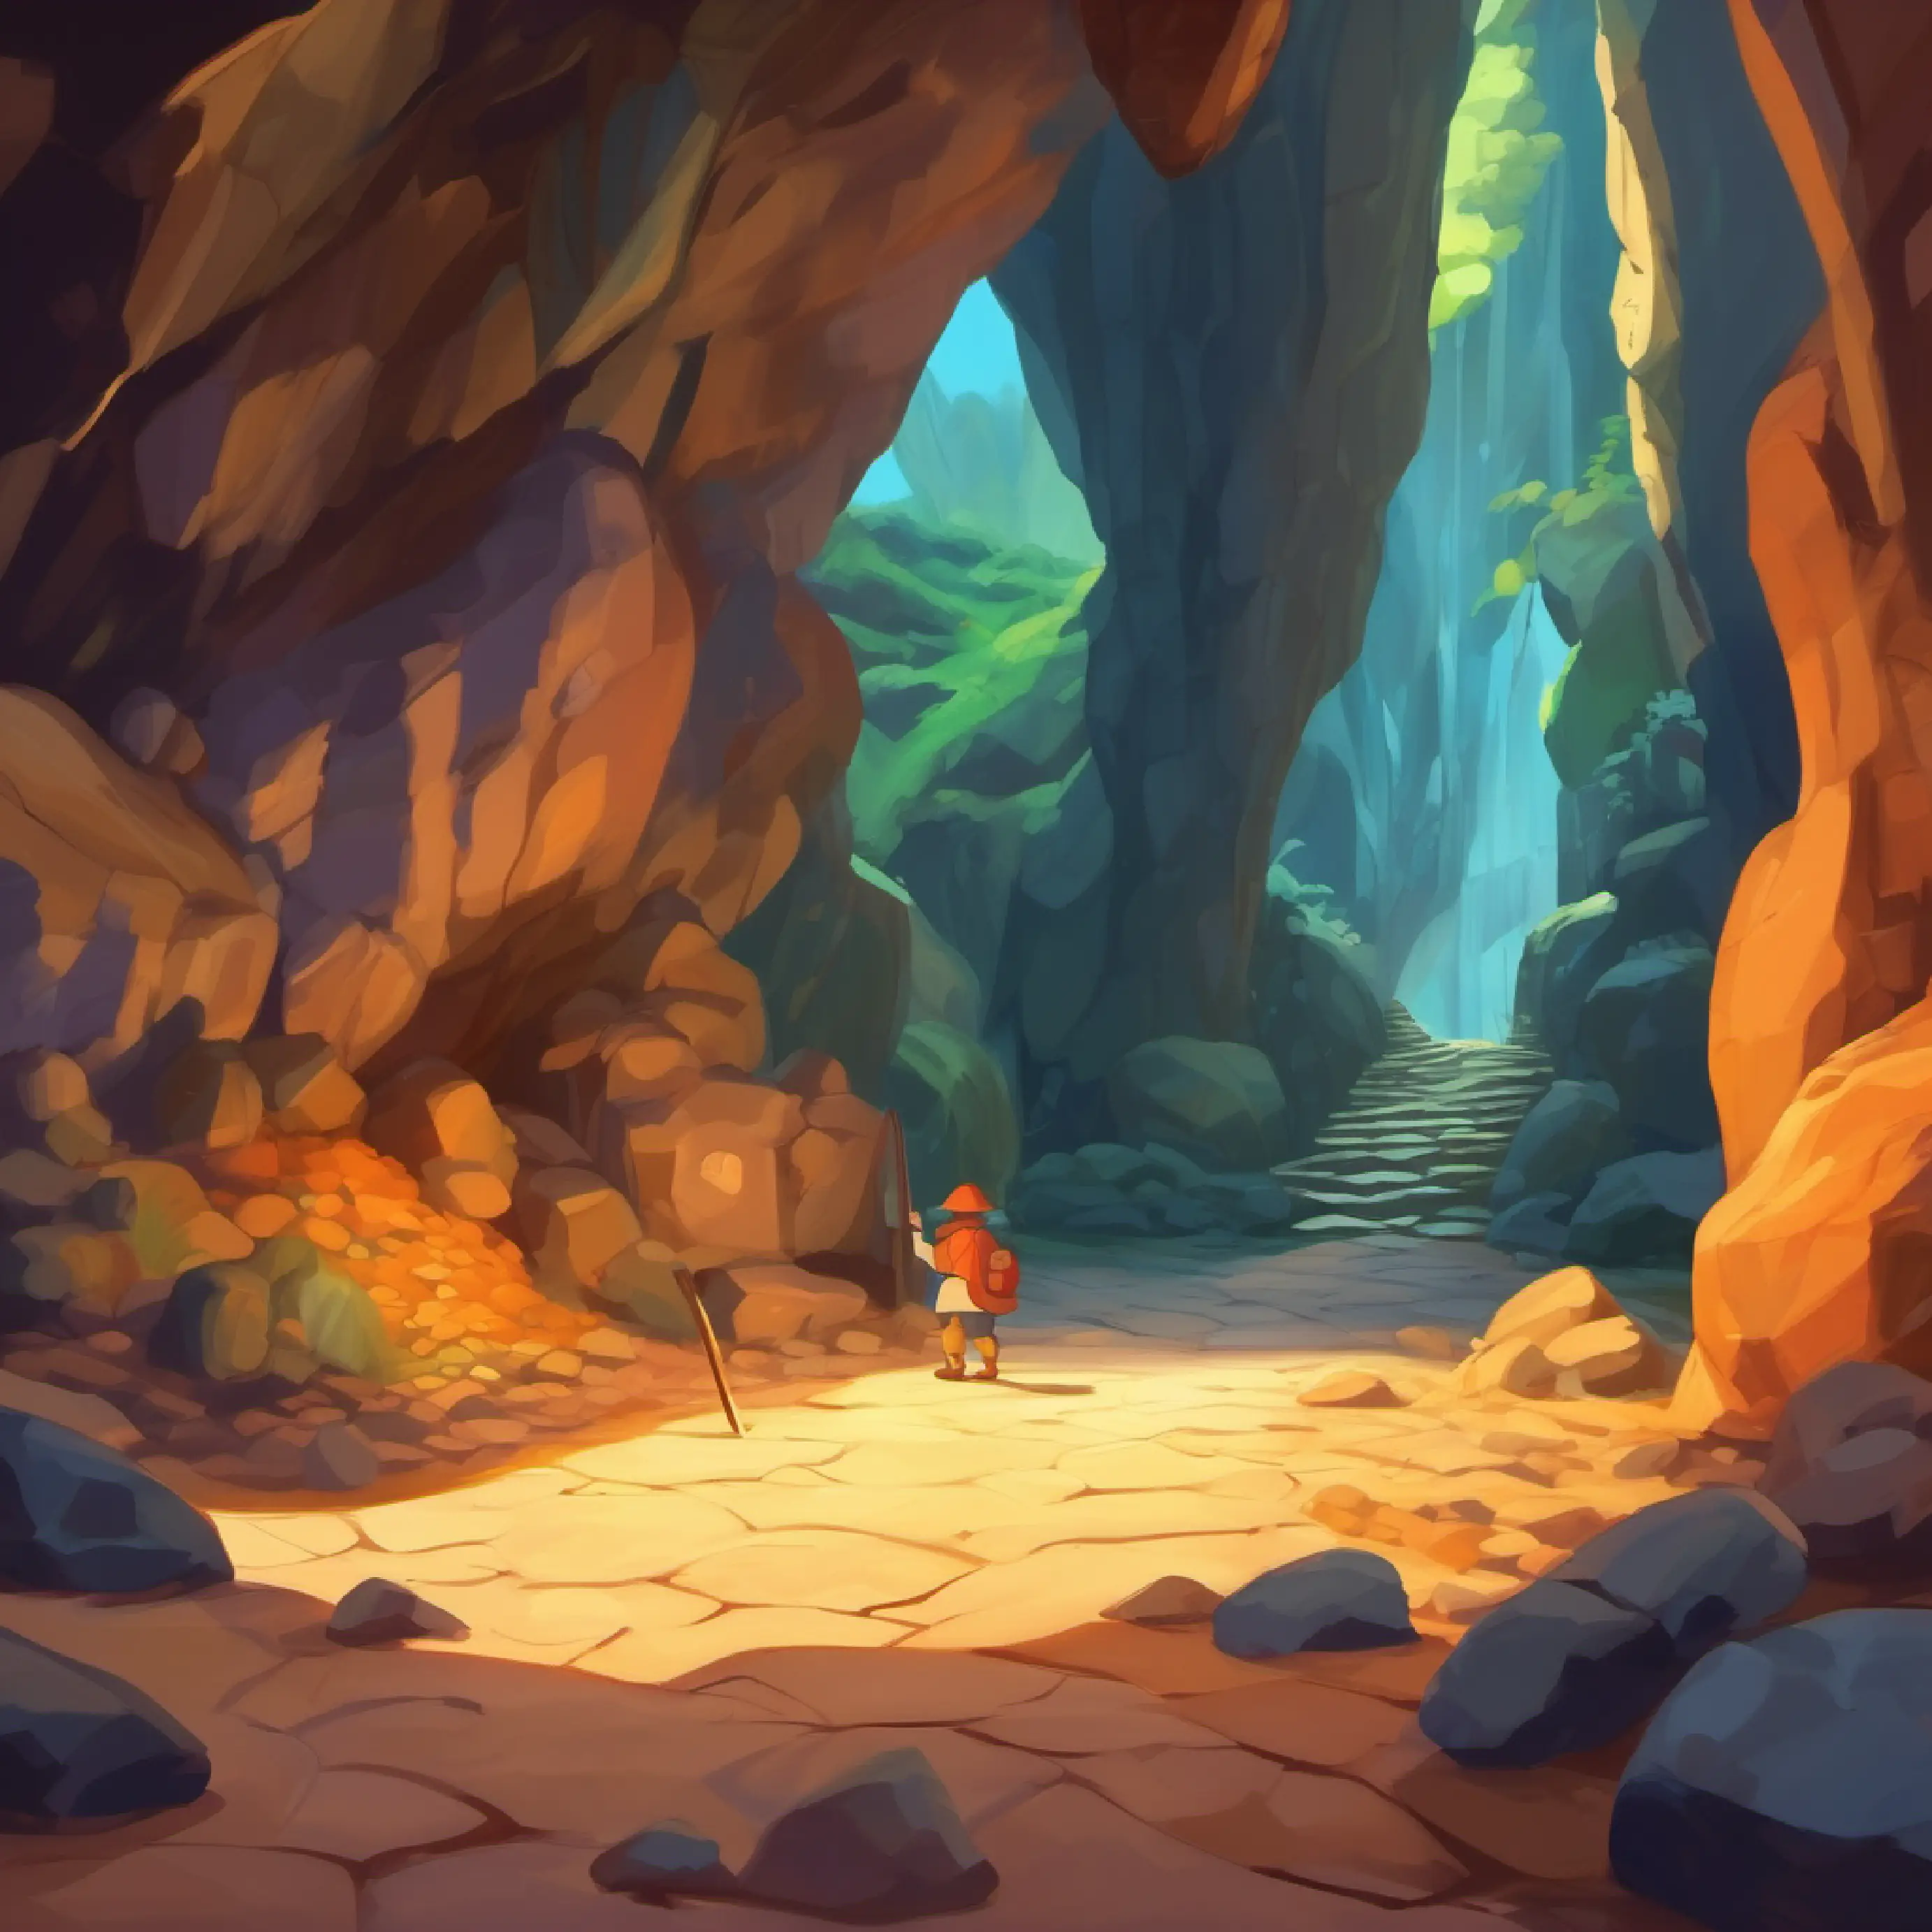 Following the sequence leads to a puzzle on the cave floor.